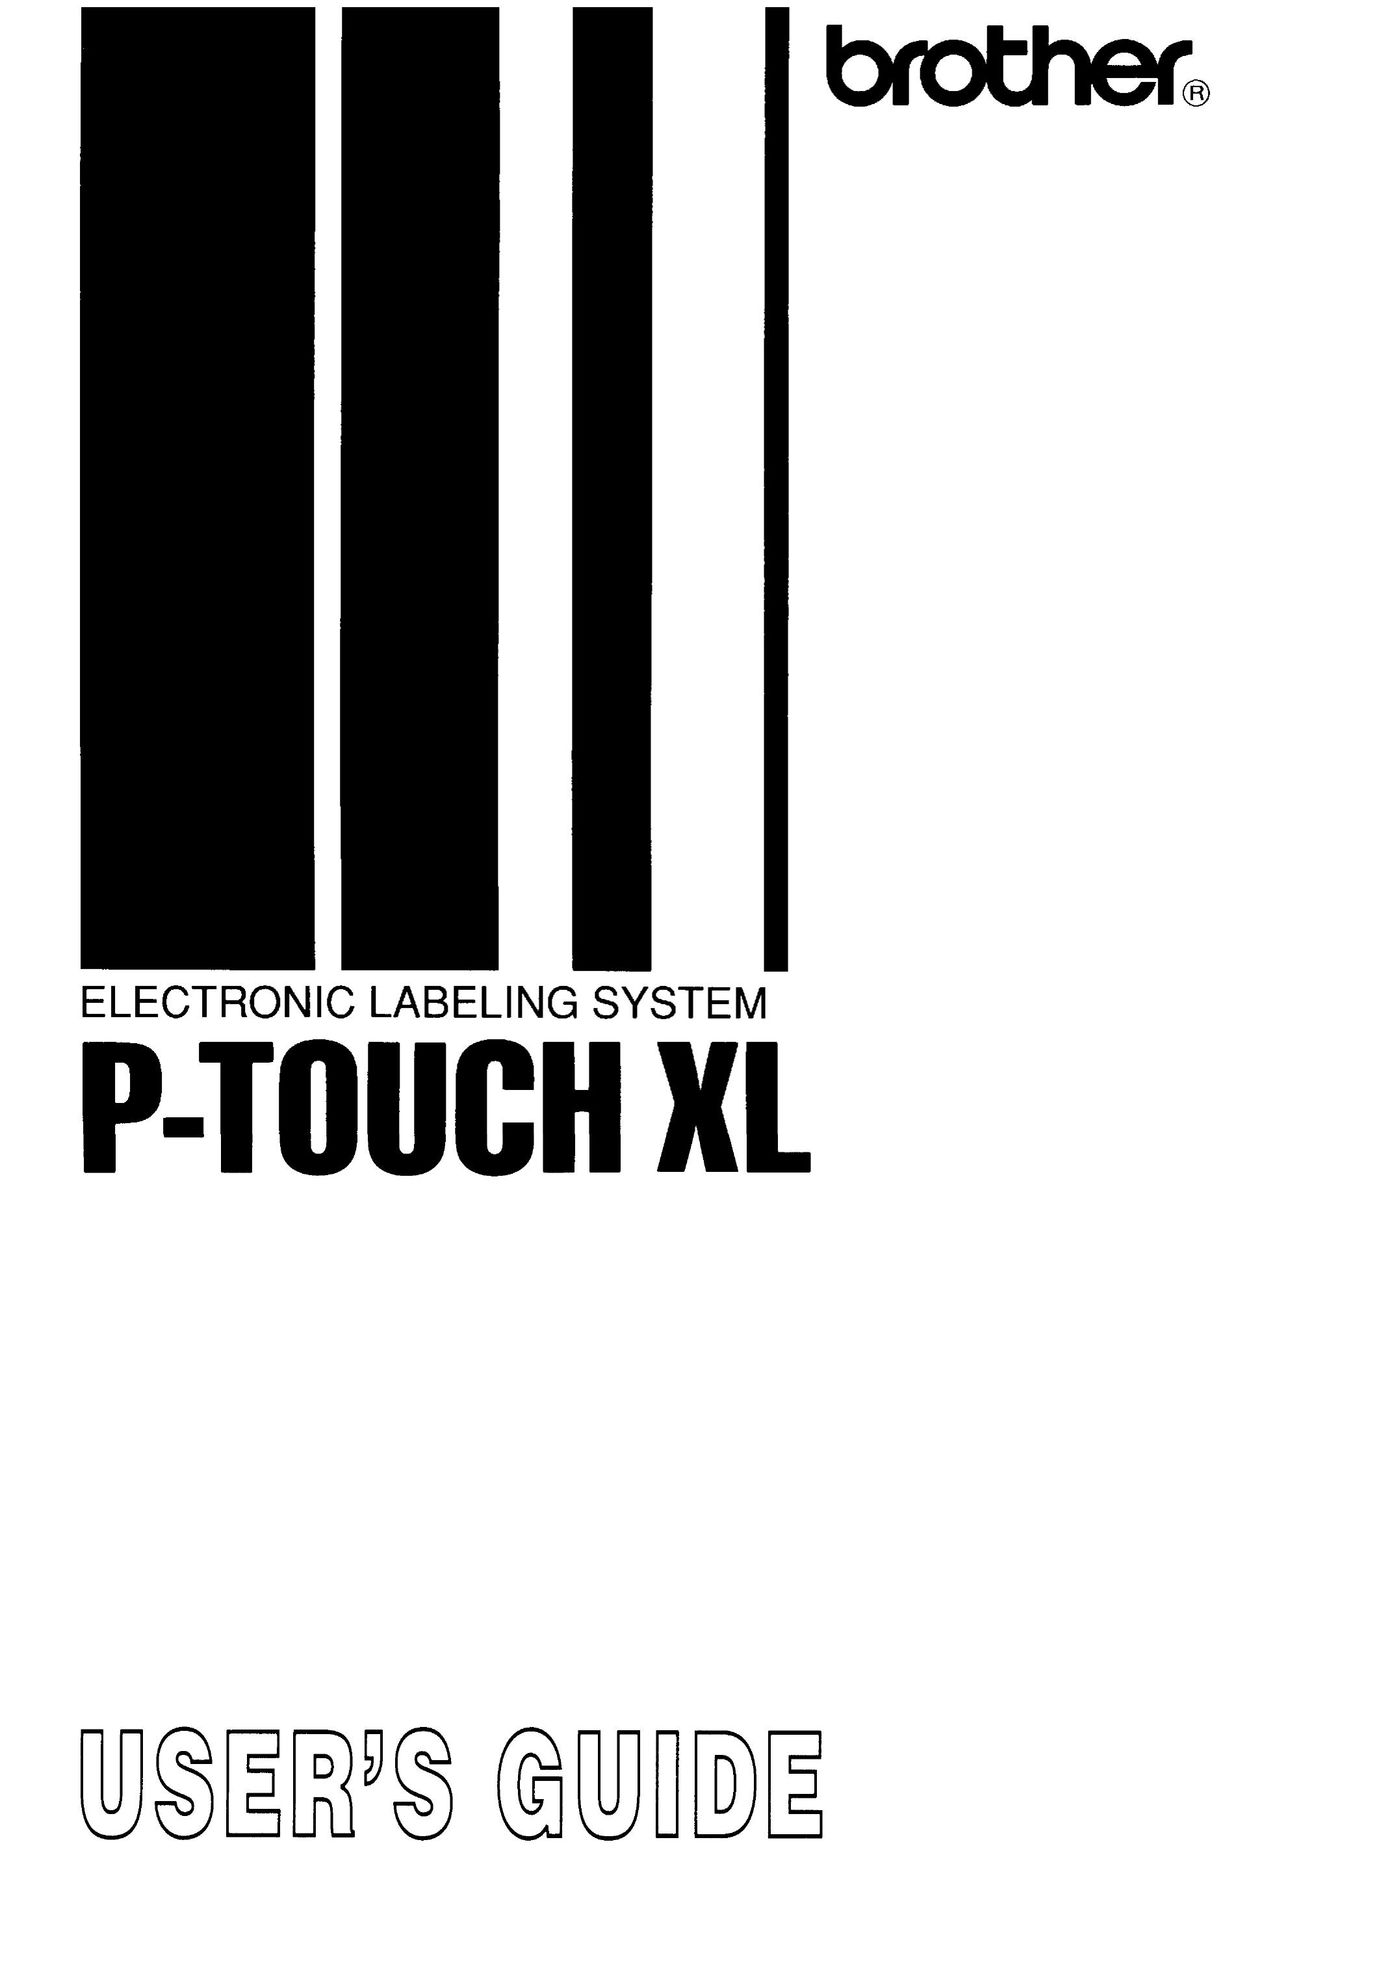 Brother P-TOUCH XL Label Maker User Manual